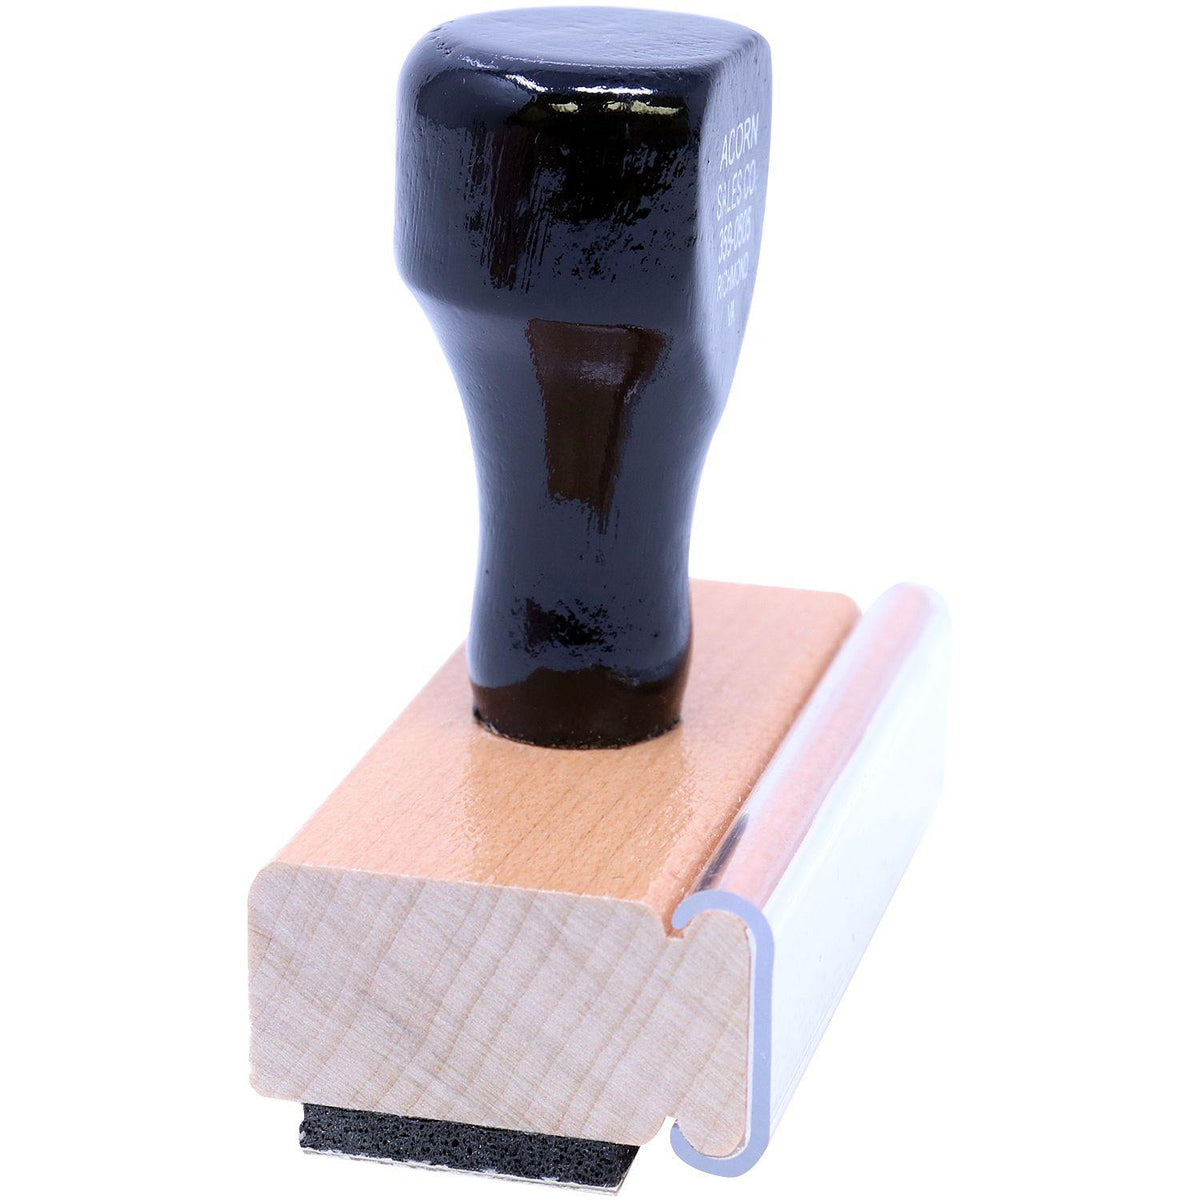 Side View of Express Mail International Rubber Stamp at an Angle